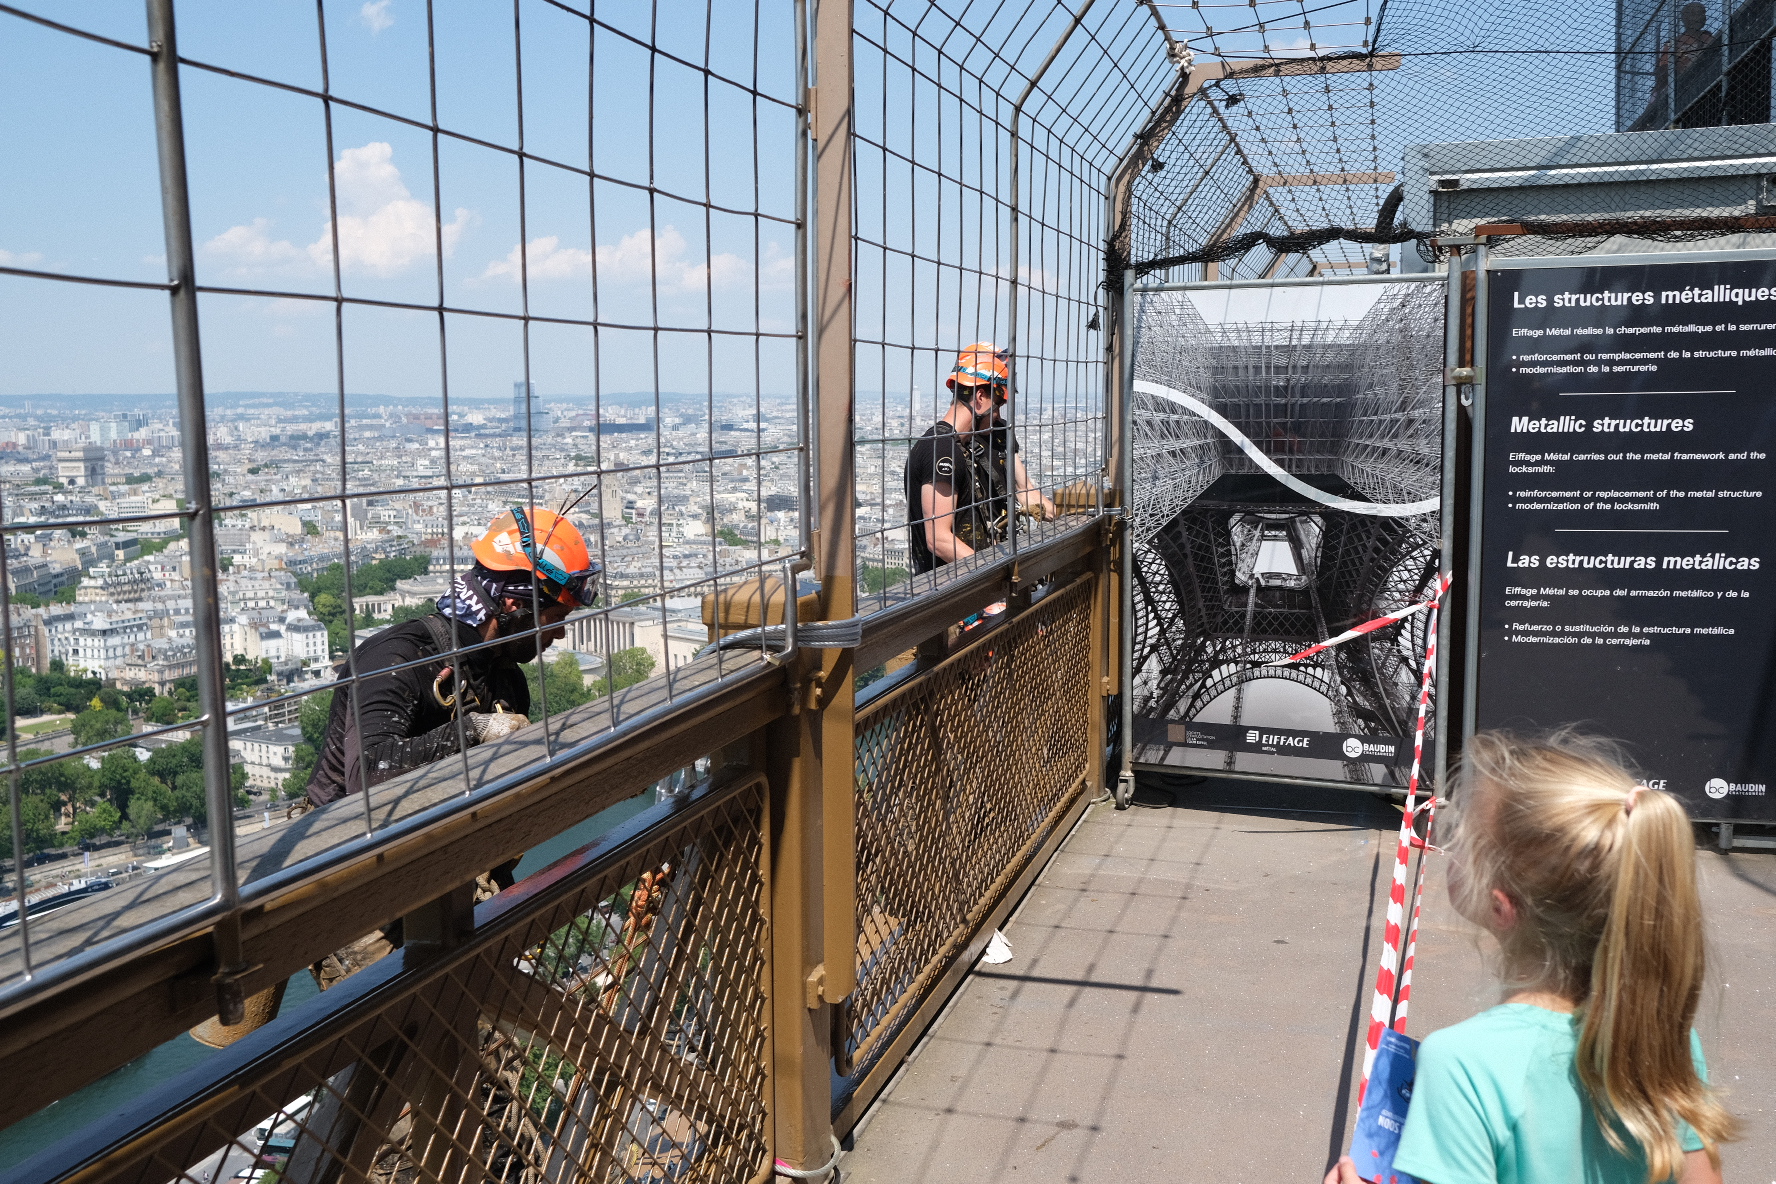 Photo of painters working on the Eiffel Tower, outside the second story deck.